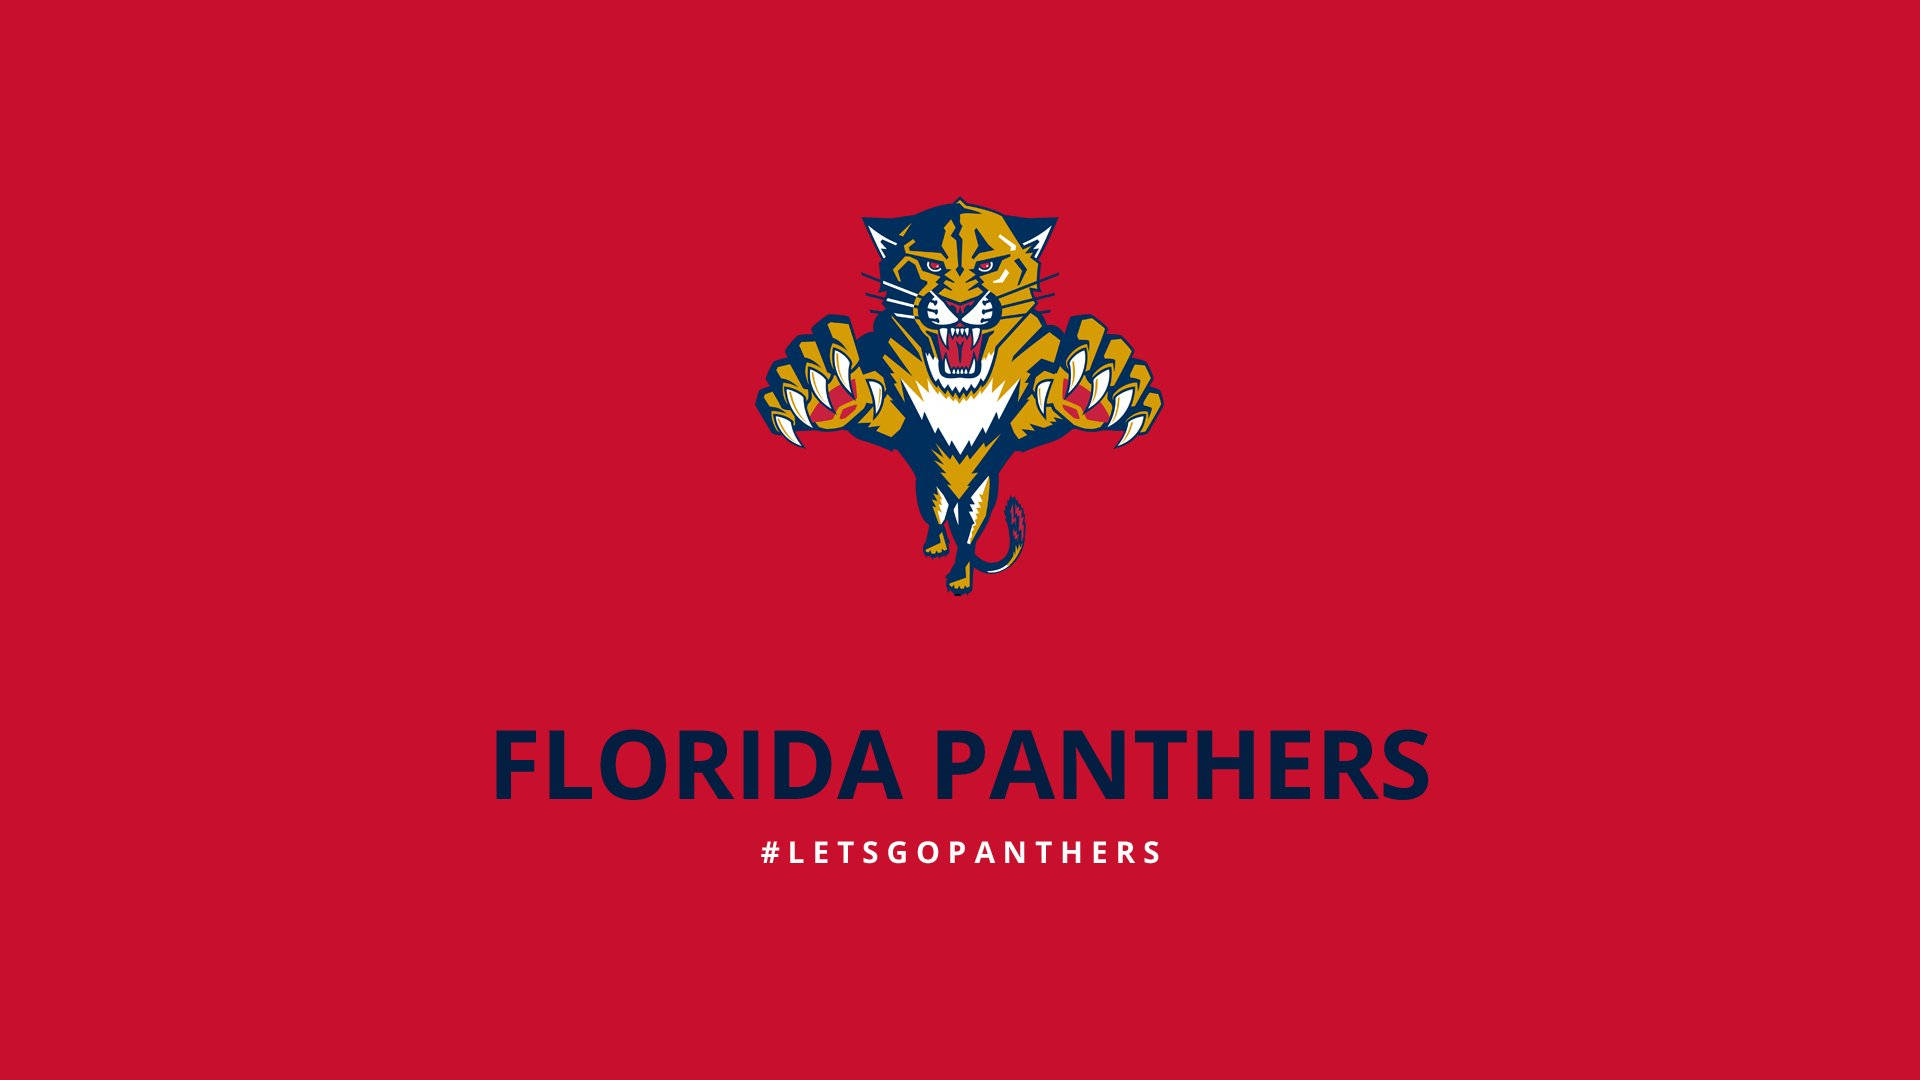 Exciting Action Moment In A Florida Panthers Game